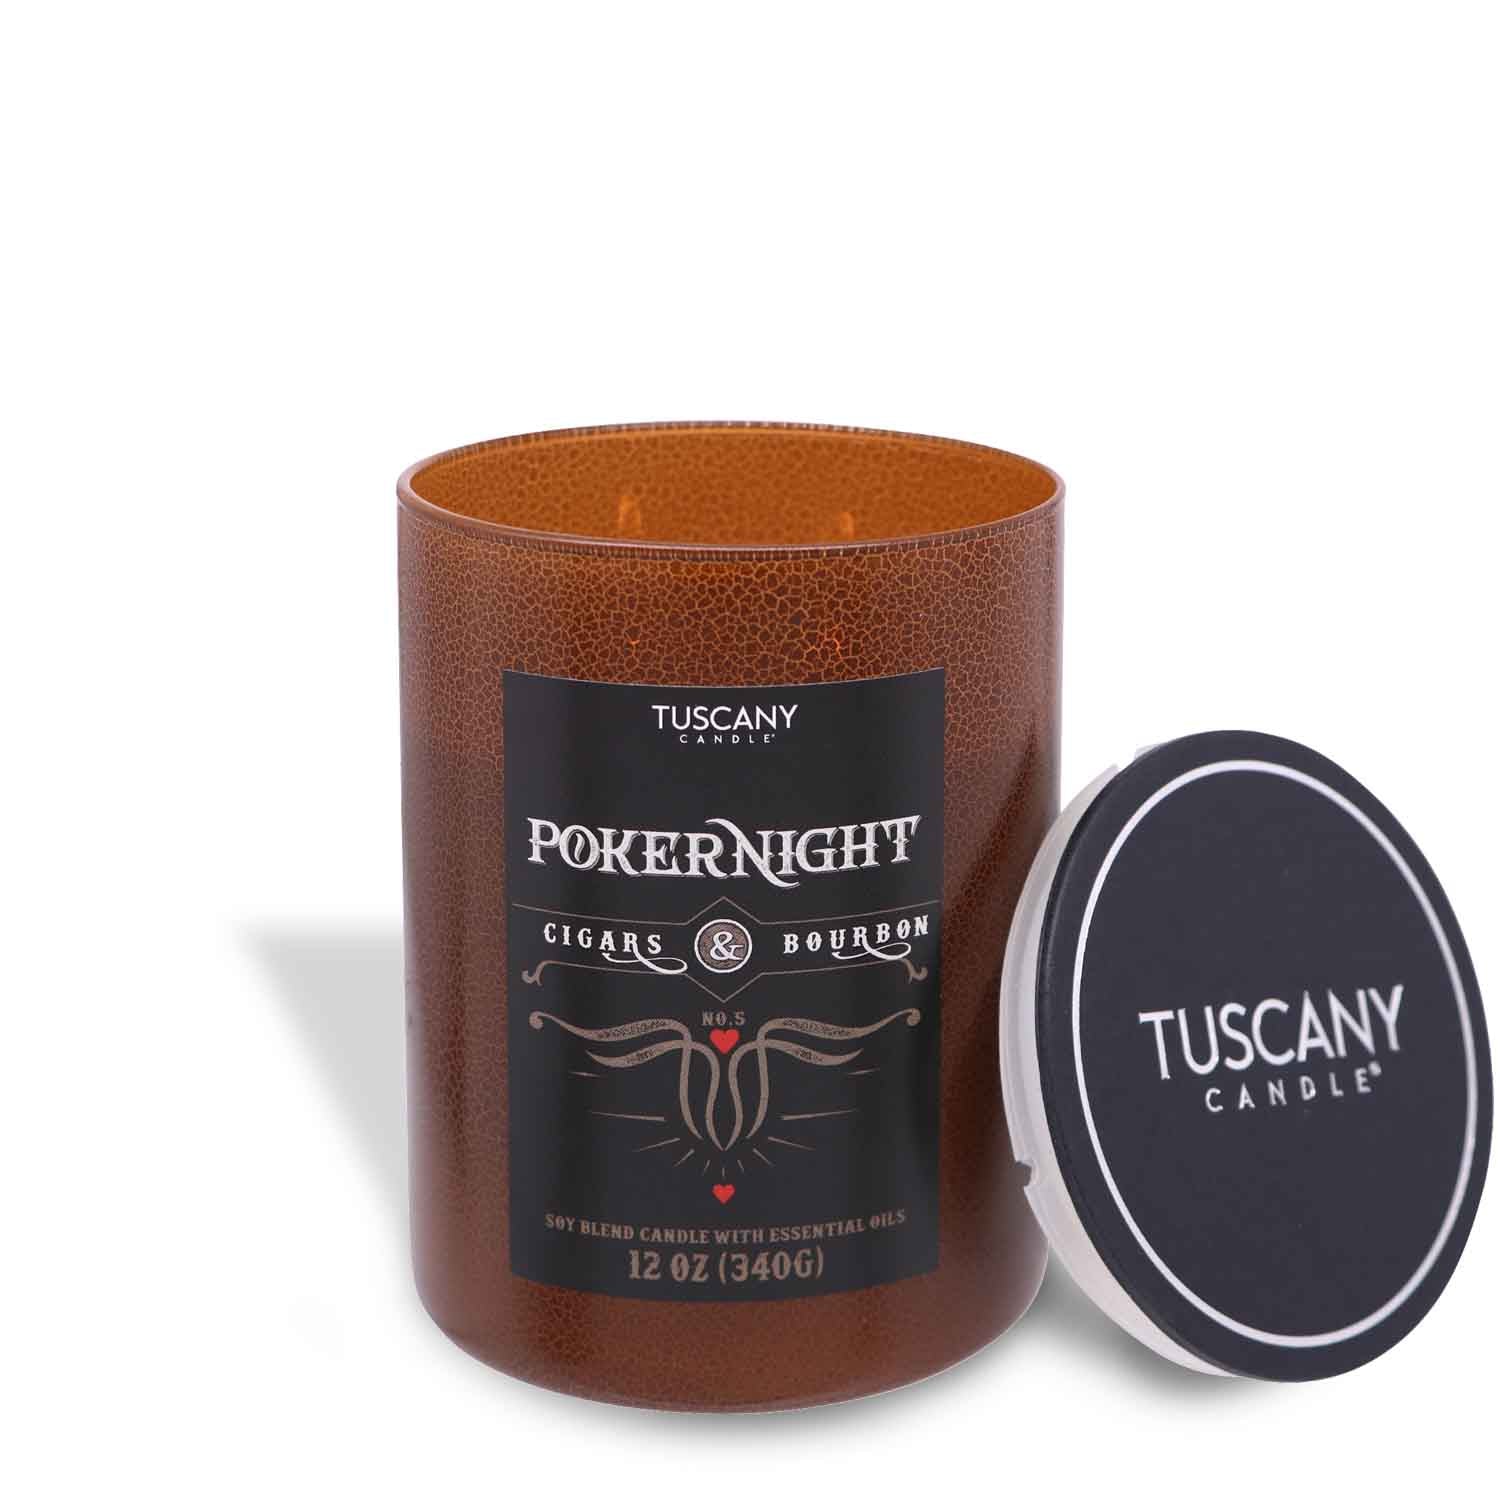 A Poker Night Scented Jar Candle (12 oz) from the Tuscany Candle® SEASONAL Rugged Retreat Collection with a label on it.